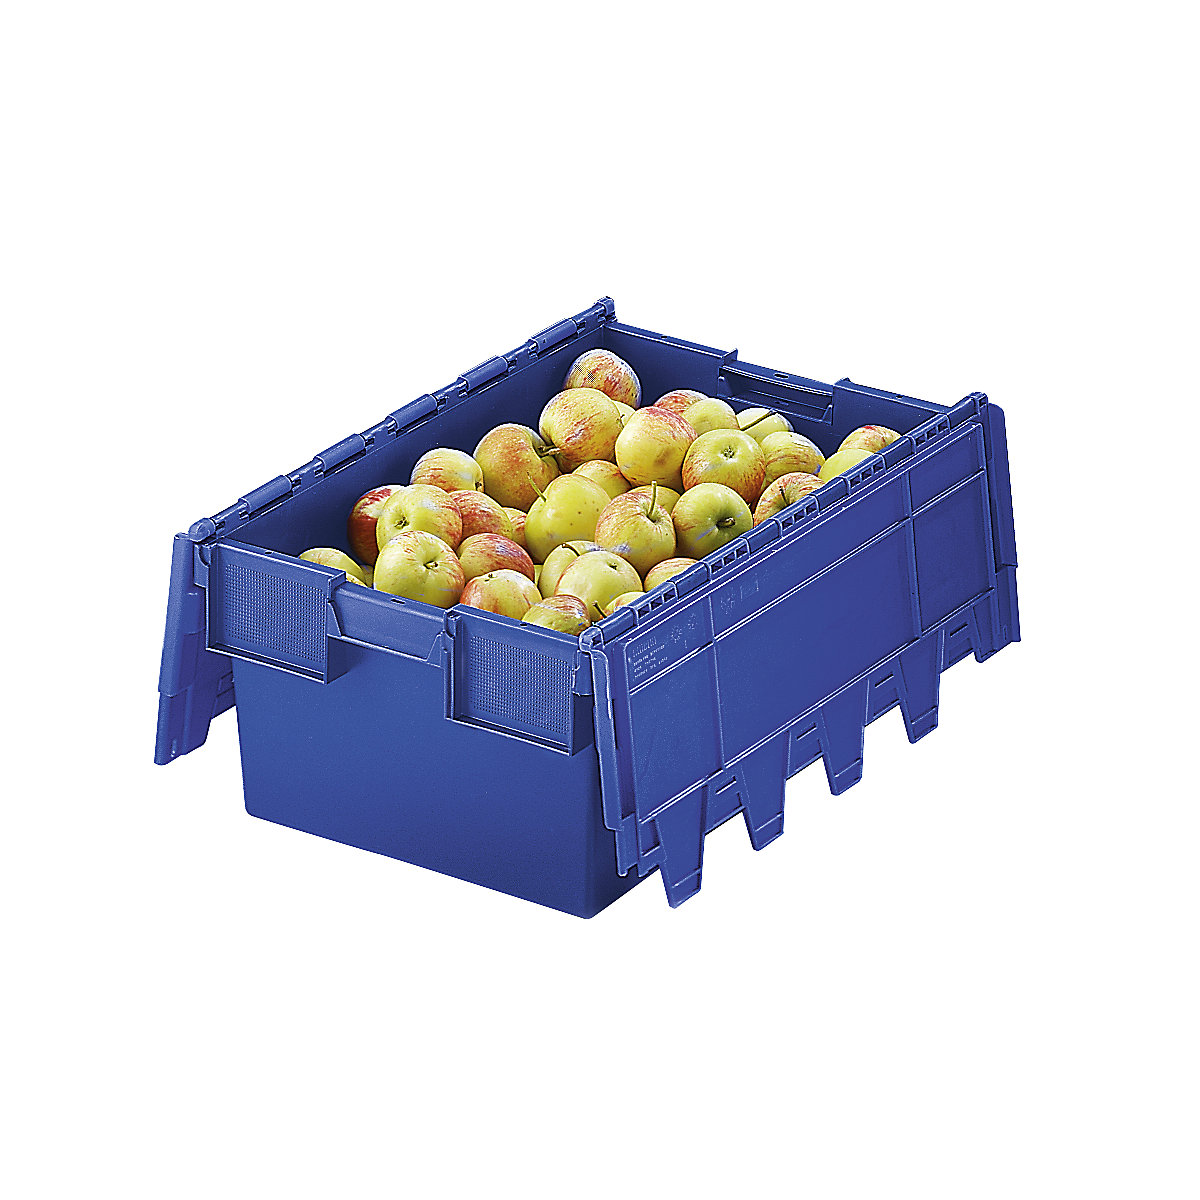 KAIMAN reusable stacking container, capacity 40 litres, LxWxH 600 x 400 x 250 mm, blue